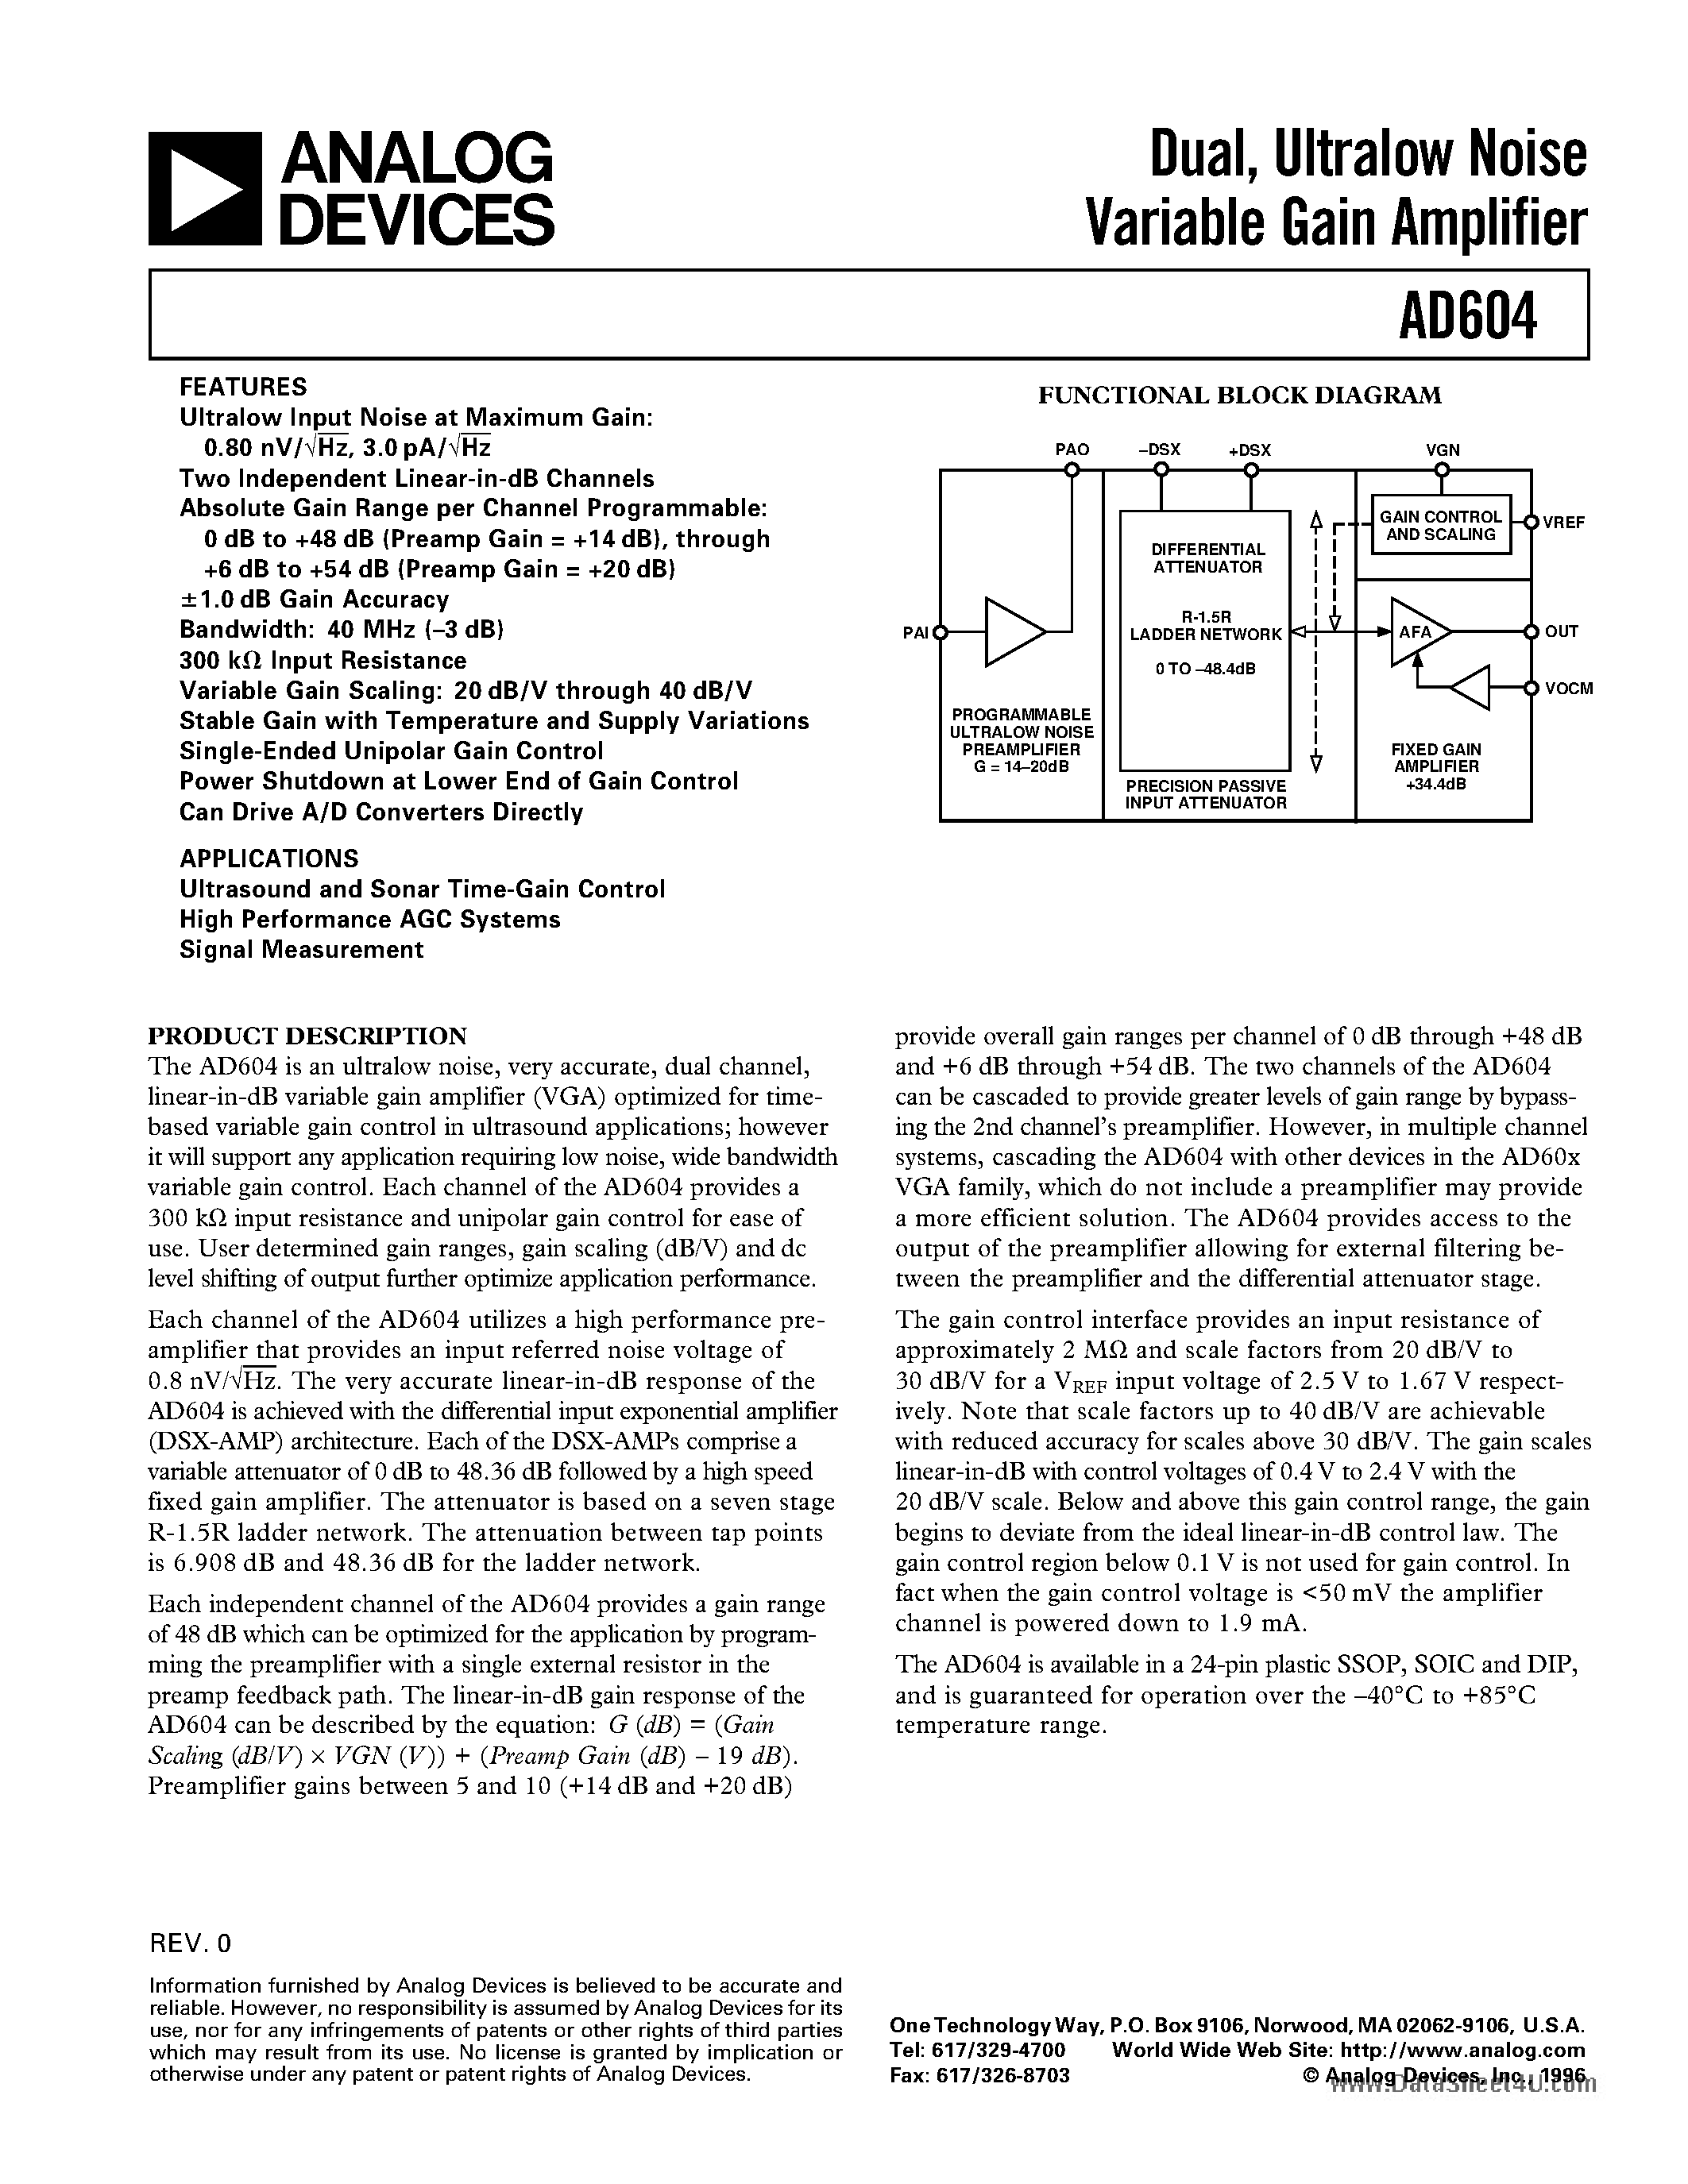 Datasheet AD604AR - Dual/ Ultralow Noise Variable Gain Amplifier page 1